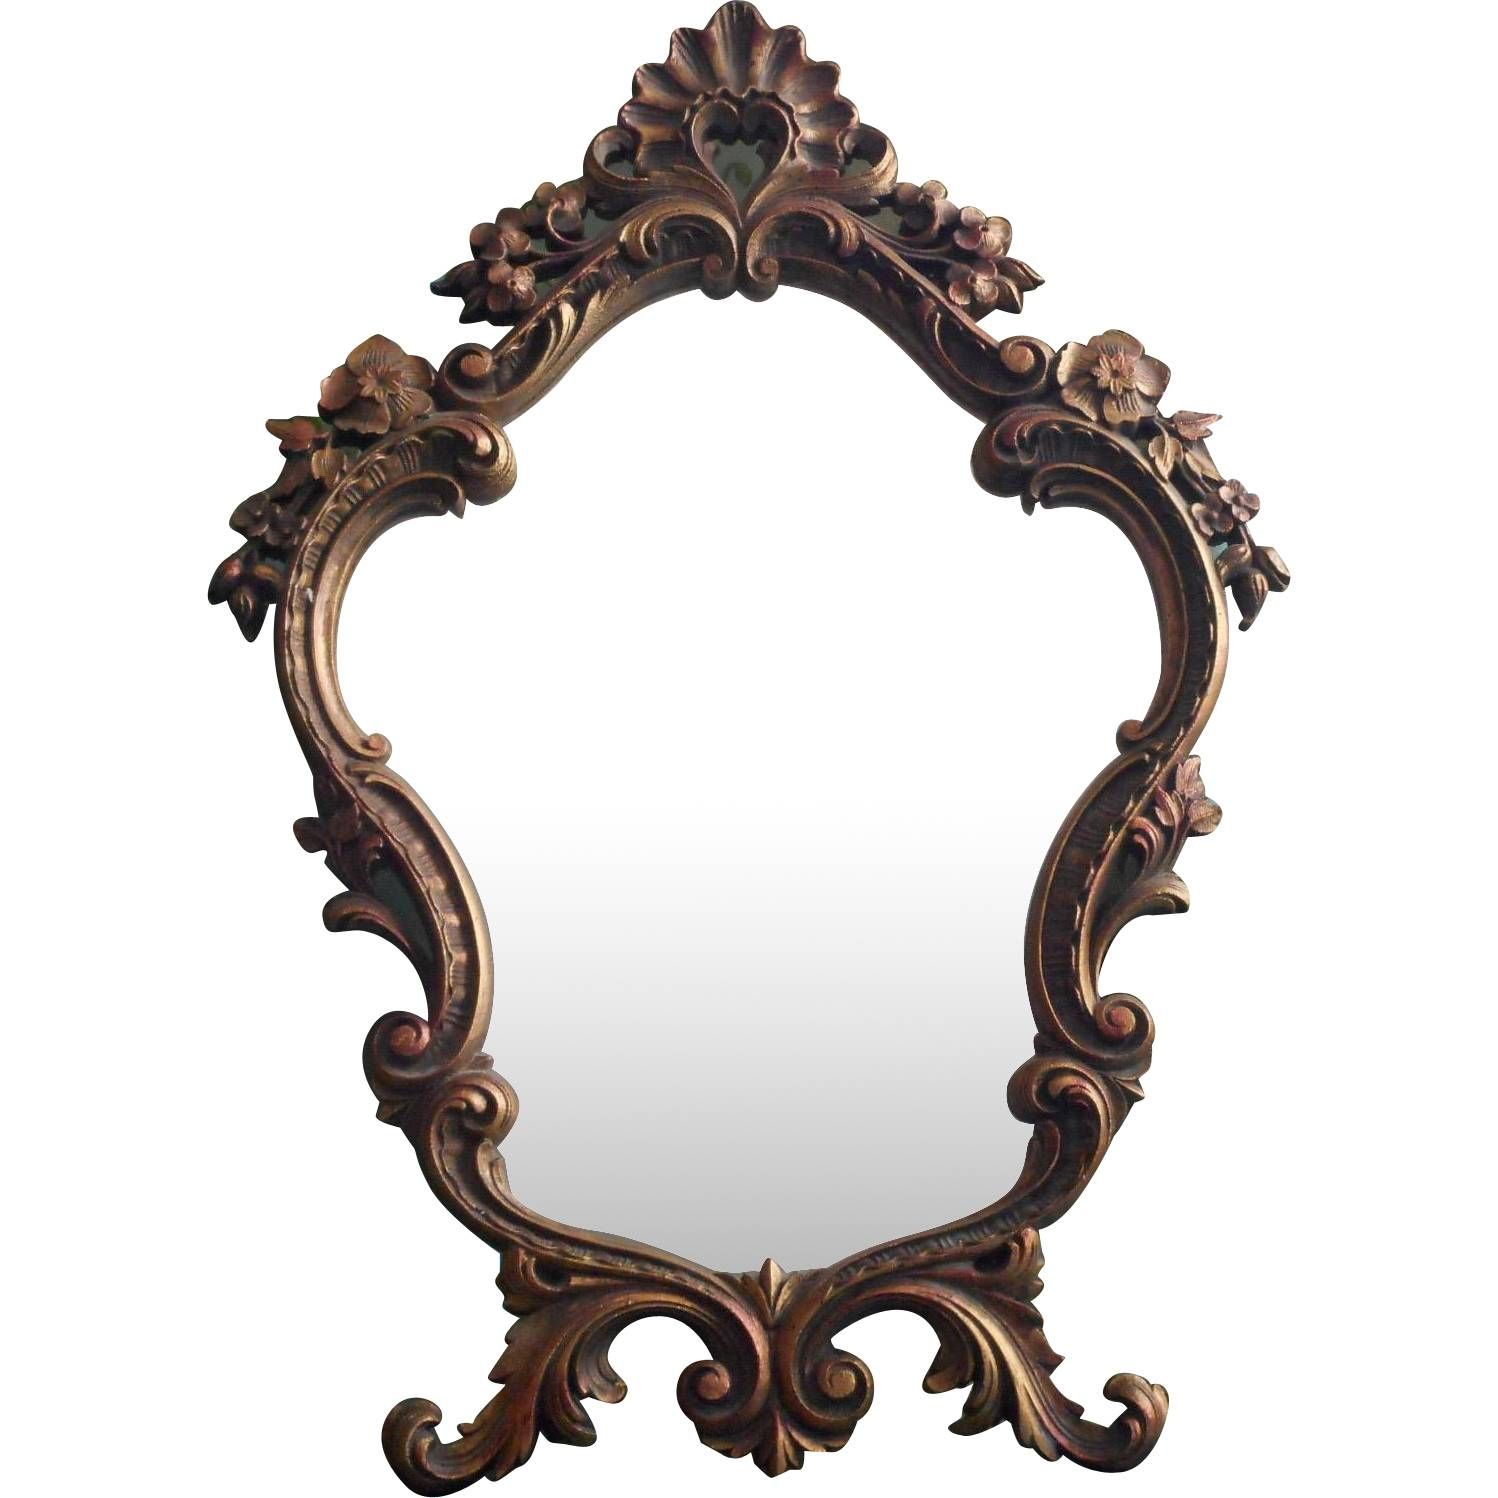 Vintage Ornate Mirror Easel Style Standing Rococo Pressed Wood Intended For Vintage Ornate Mirrors (View 14 of 15)